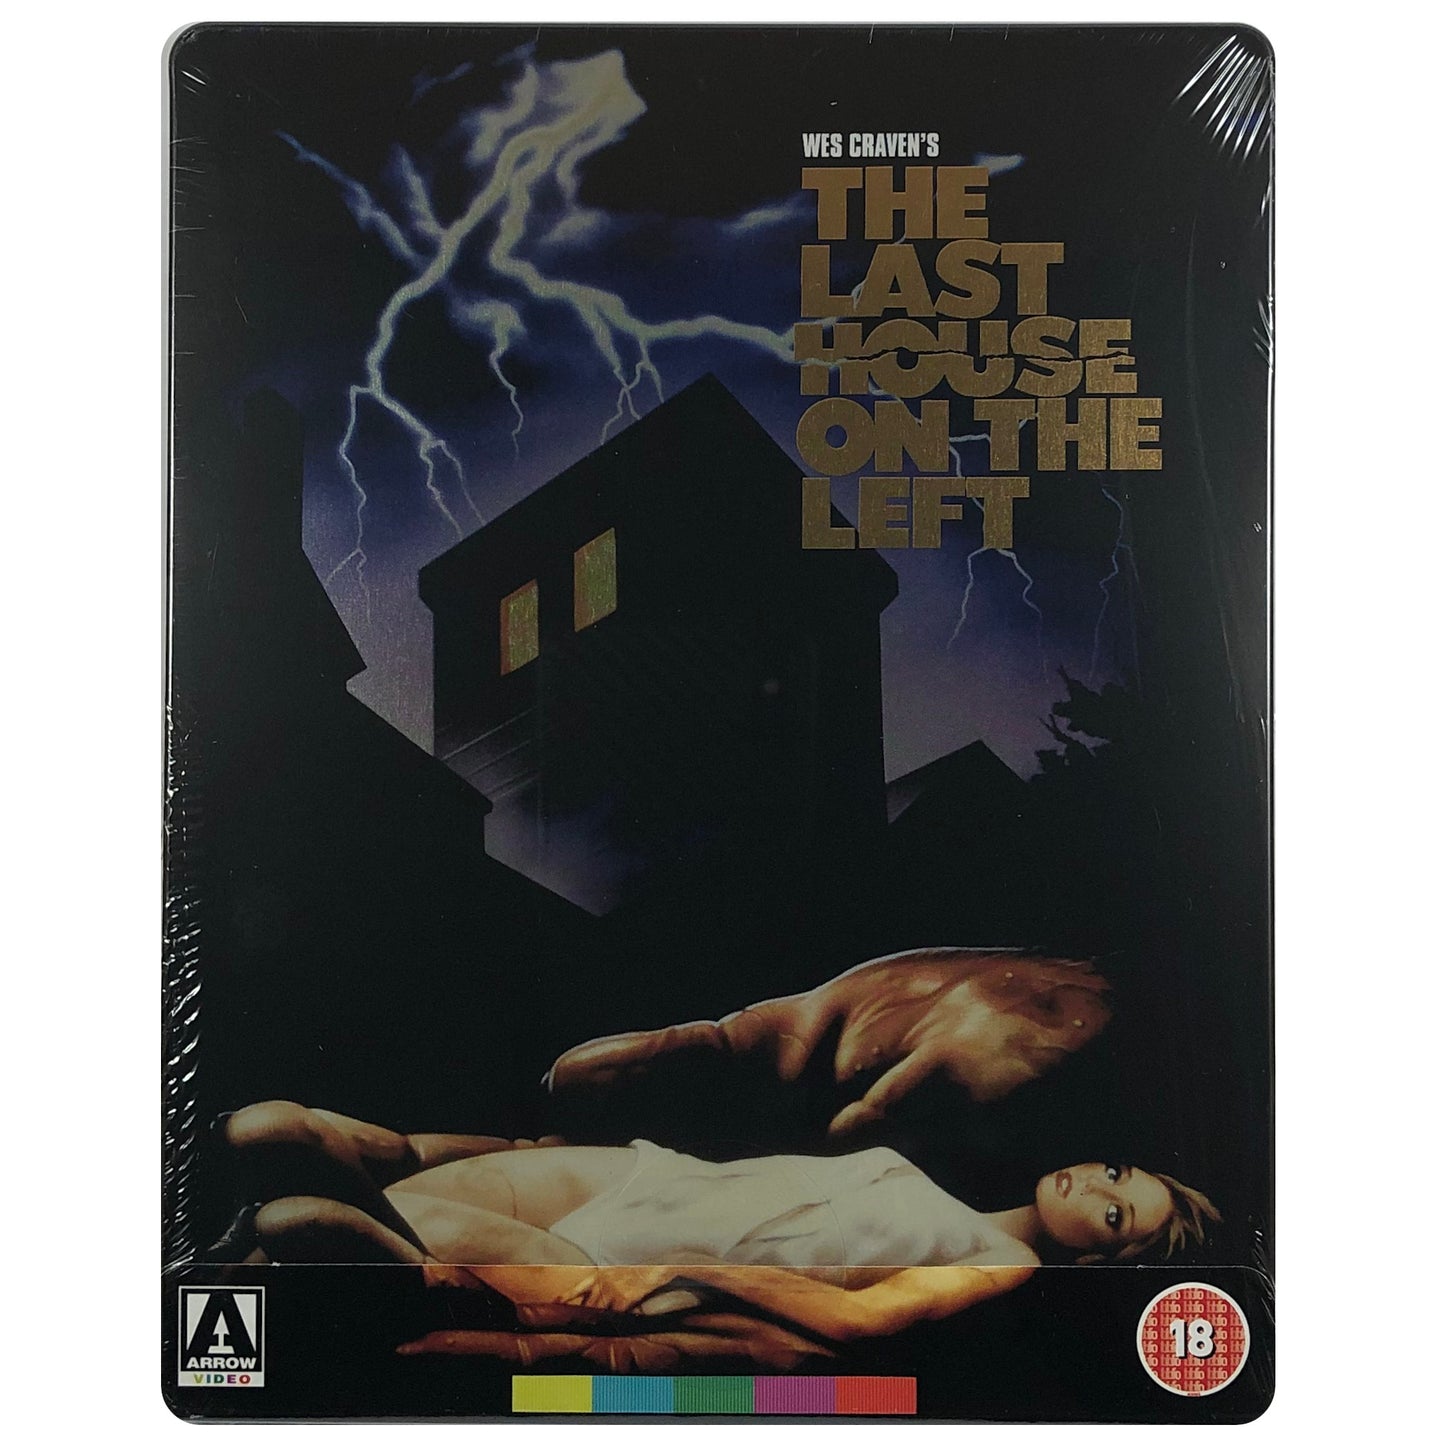 The Last House on the Left Blu-Ray Steelbook